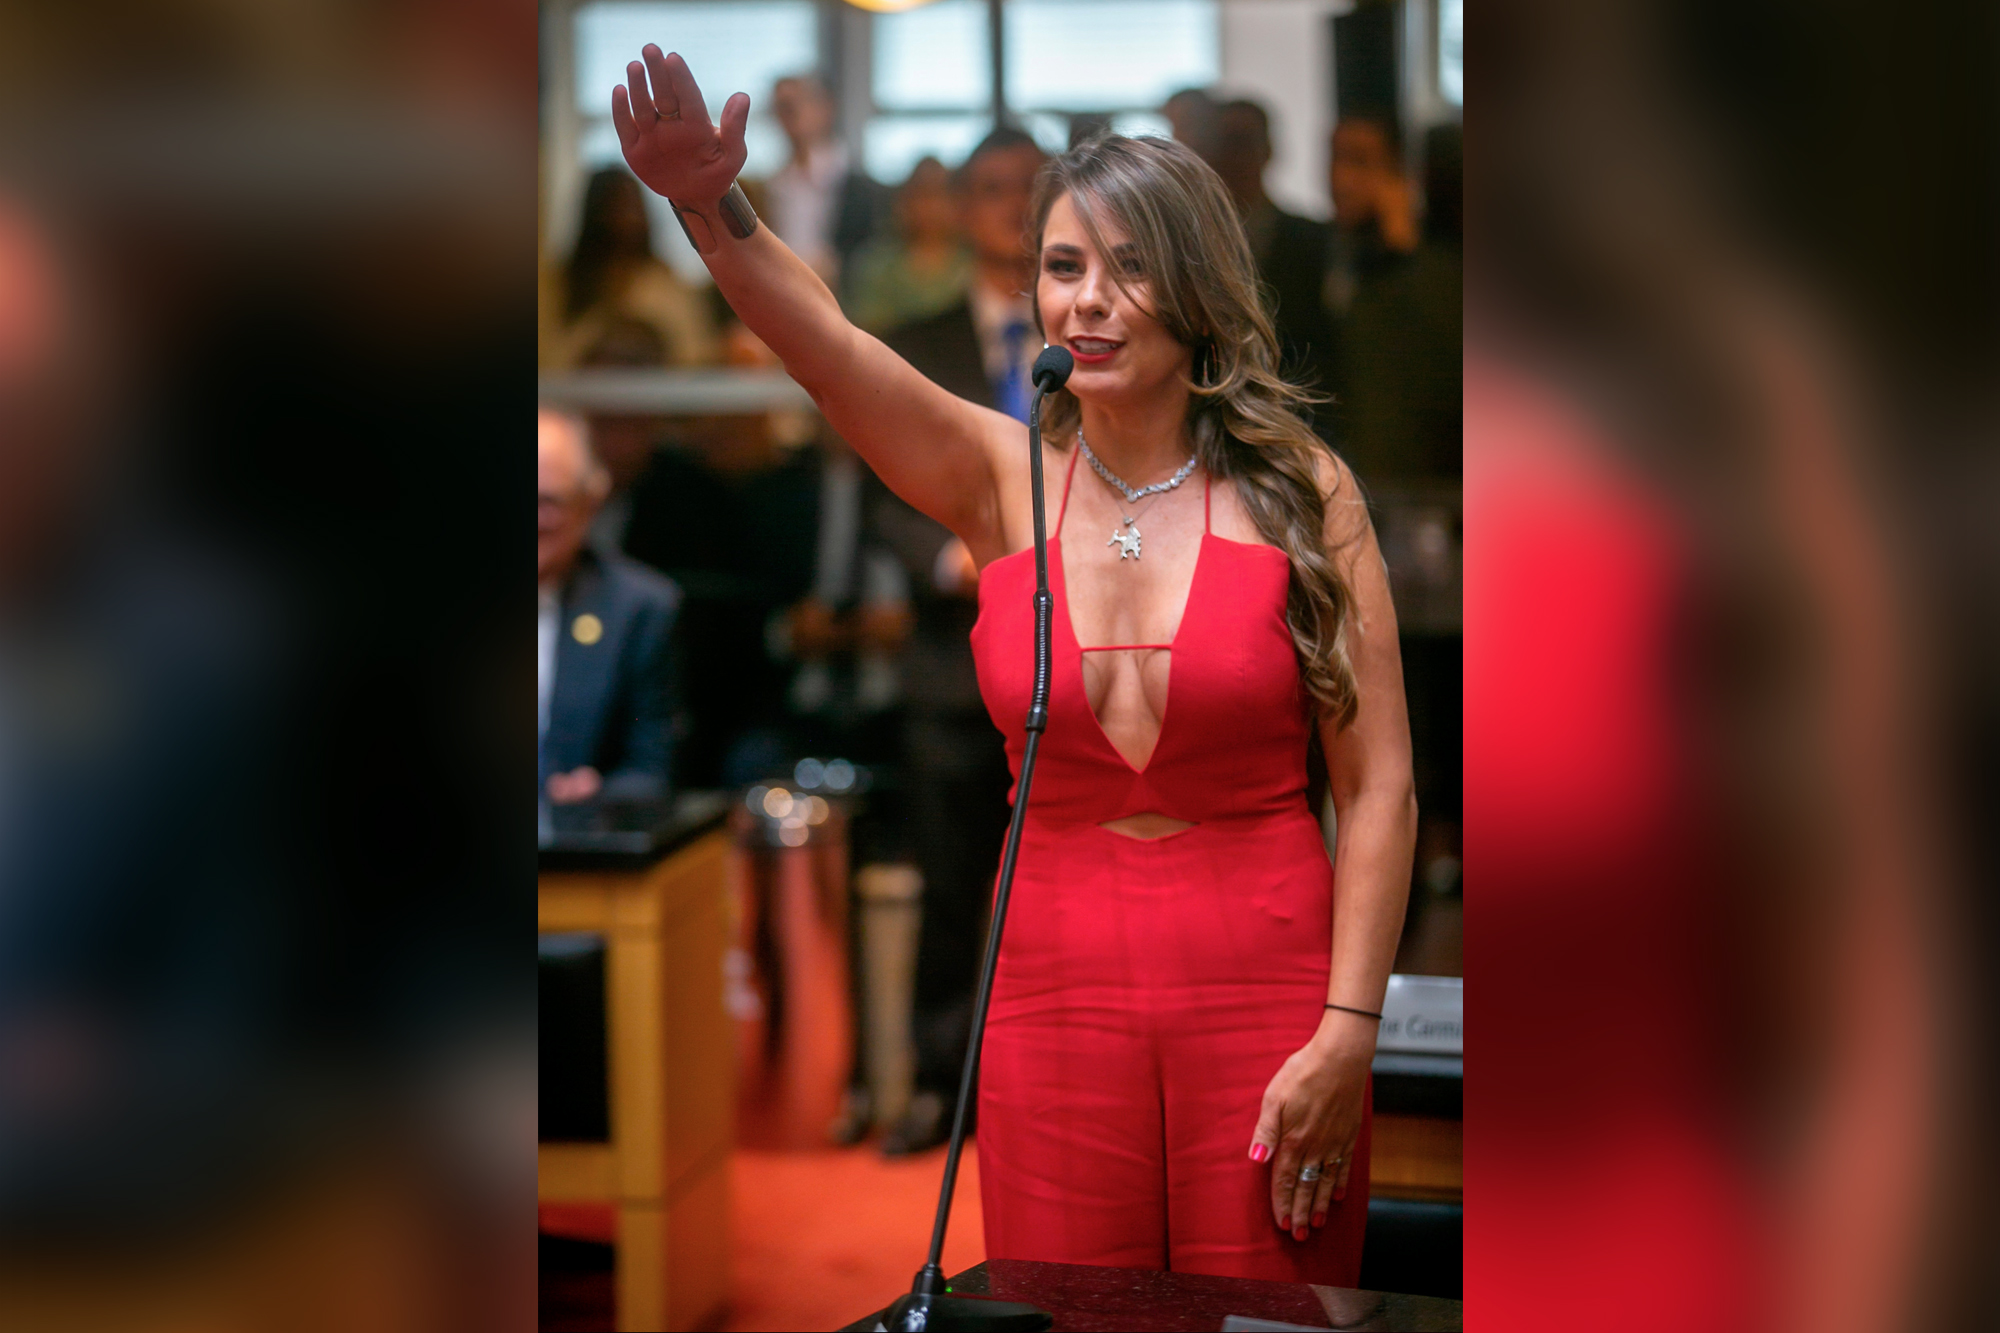 alexandra cifuentes recommends wife shows too much cleavage pic